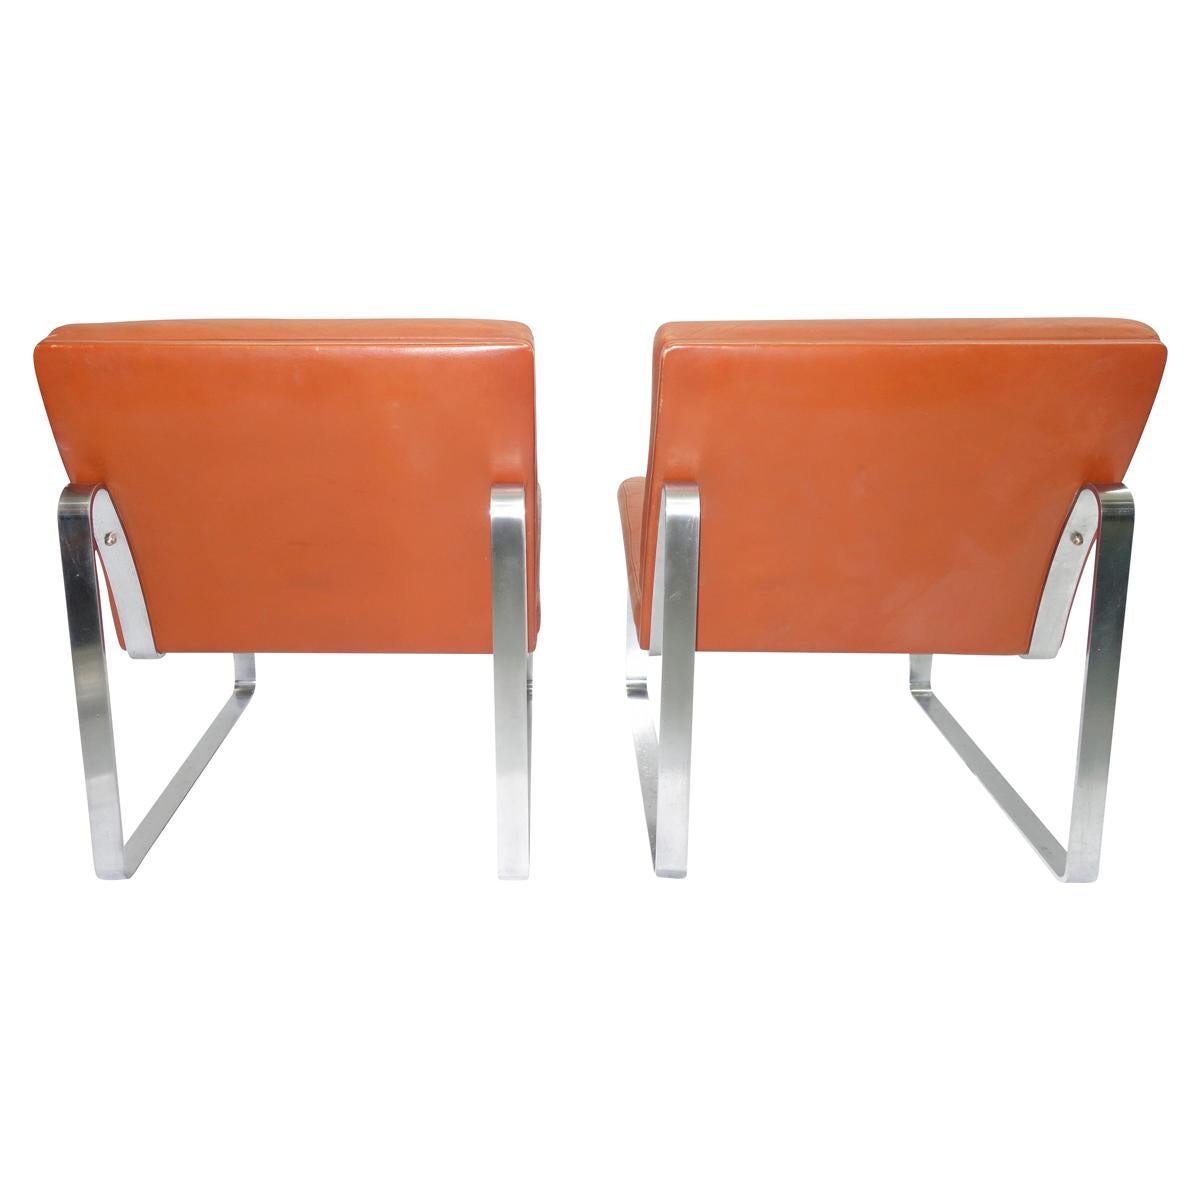 Stunning pair of lounge chairs in reddish brown leather on steel legs. Designed by Ole Gjerløv-Knudsen and Torben Lind as part of the Moduline series in 1961 and manufactured by France & Son. These chairs are a rare edition of Moduline which is